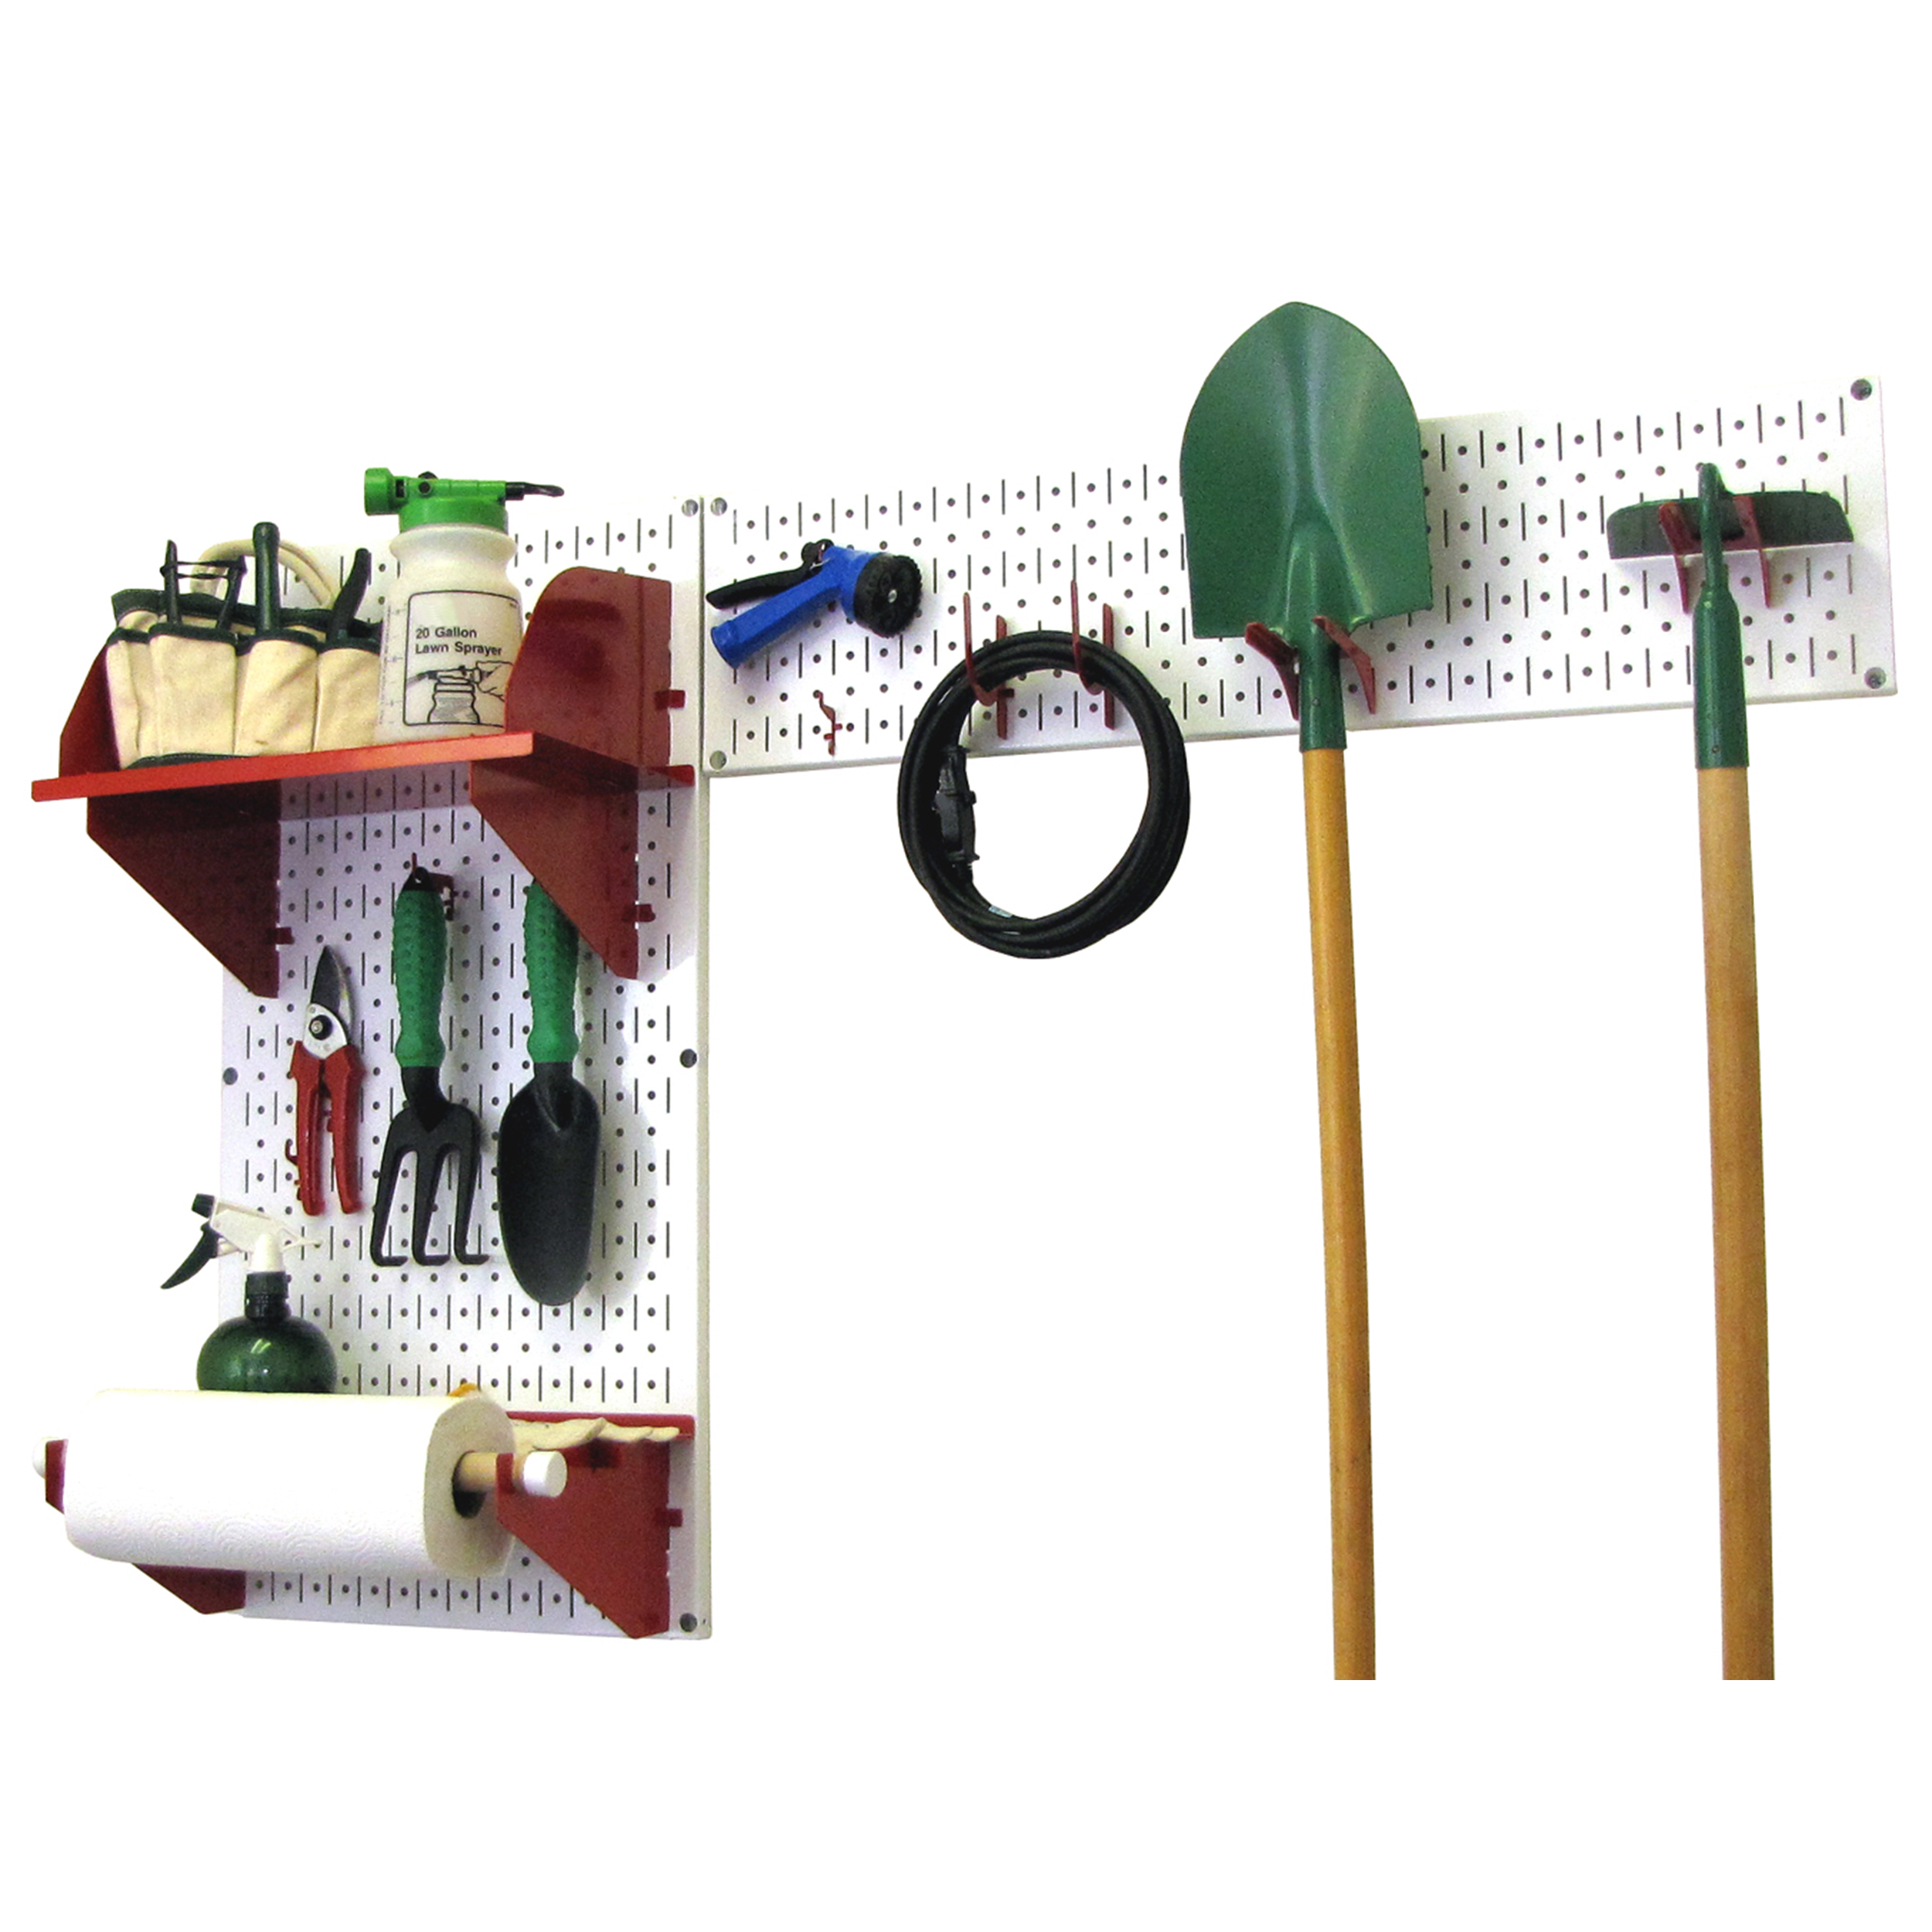 Pegboard Garden Tool Board Organizer With White Pegboard And Red Accessories